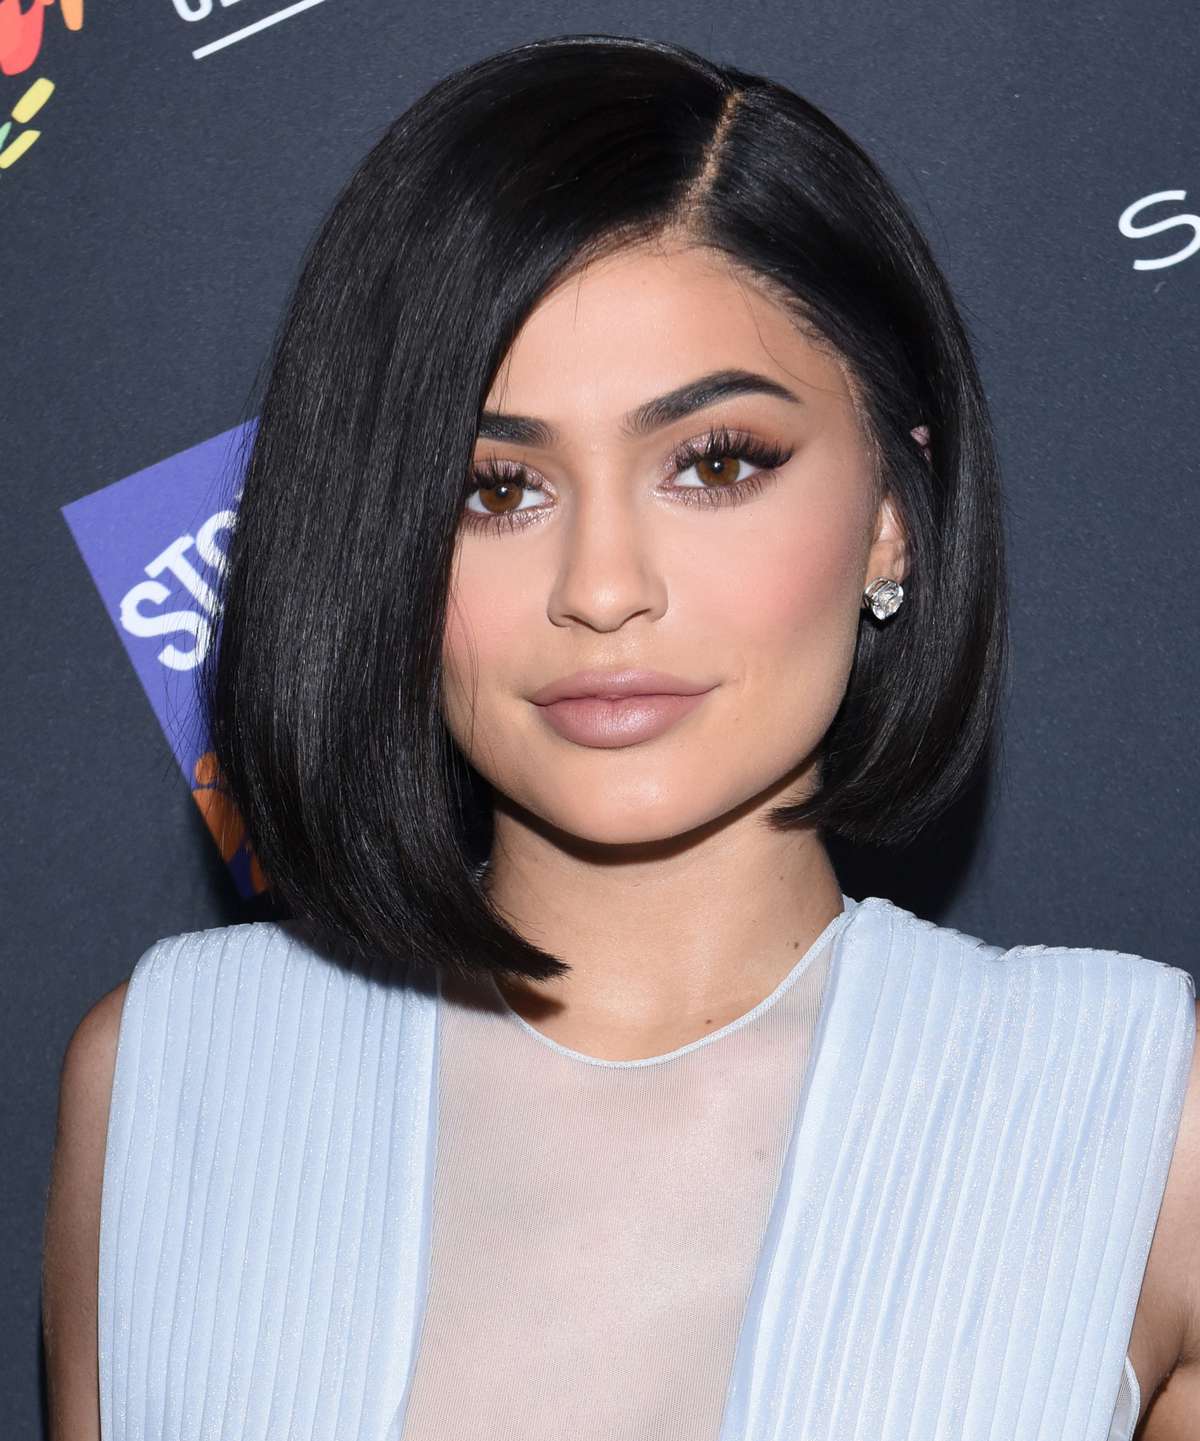 Kylie Jenner attends SinfulColors and Kylie Jenner Announce charitybuzz.com Auction for Anti Bullying on July 14, 2016 in Los Angeles, California.